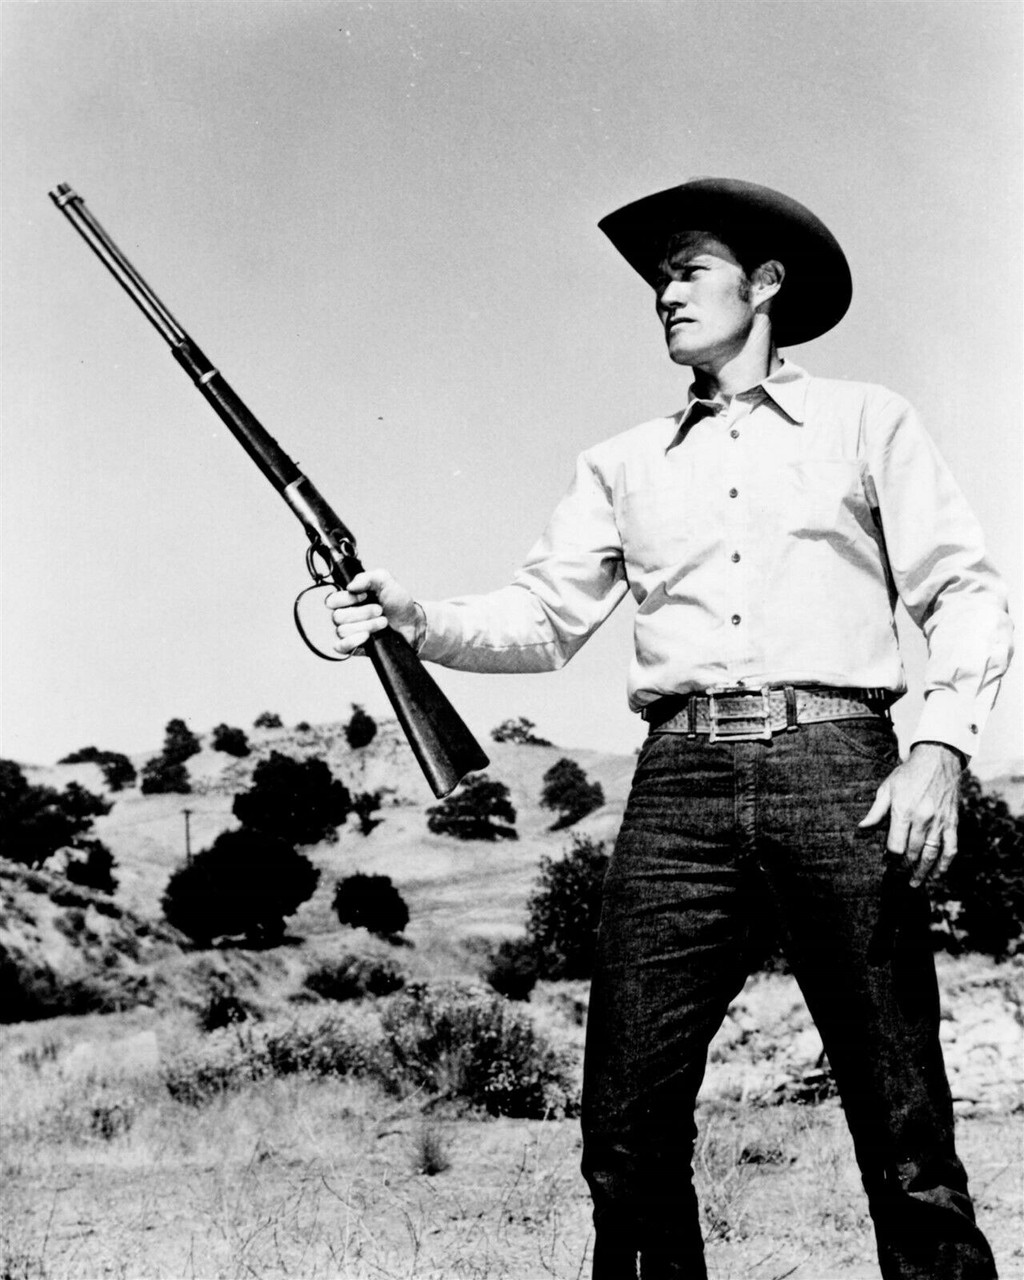 CHUCK CONNORS THE RIFLEMAN 8X10 GLOSSY PHOTO PICTURE IMAGE #4 